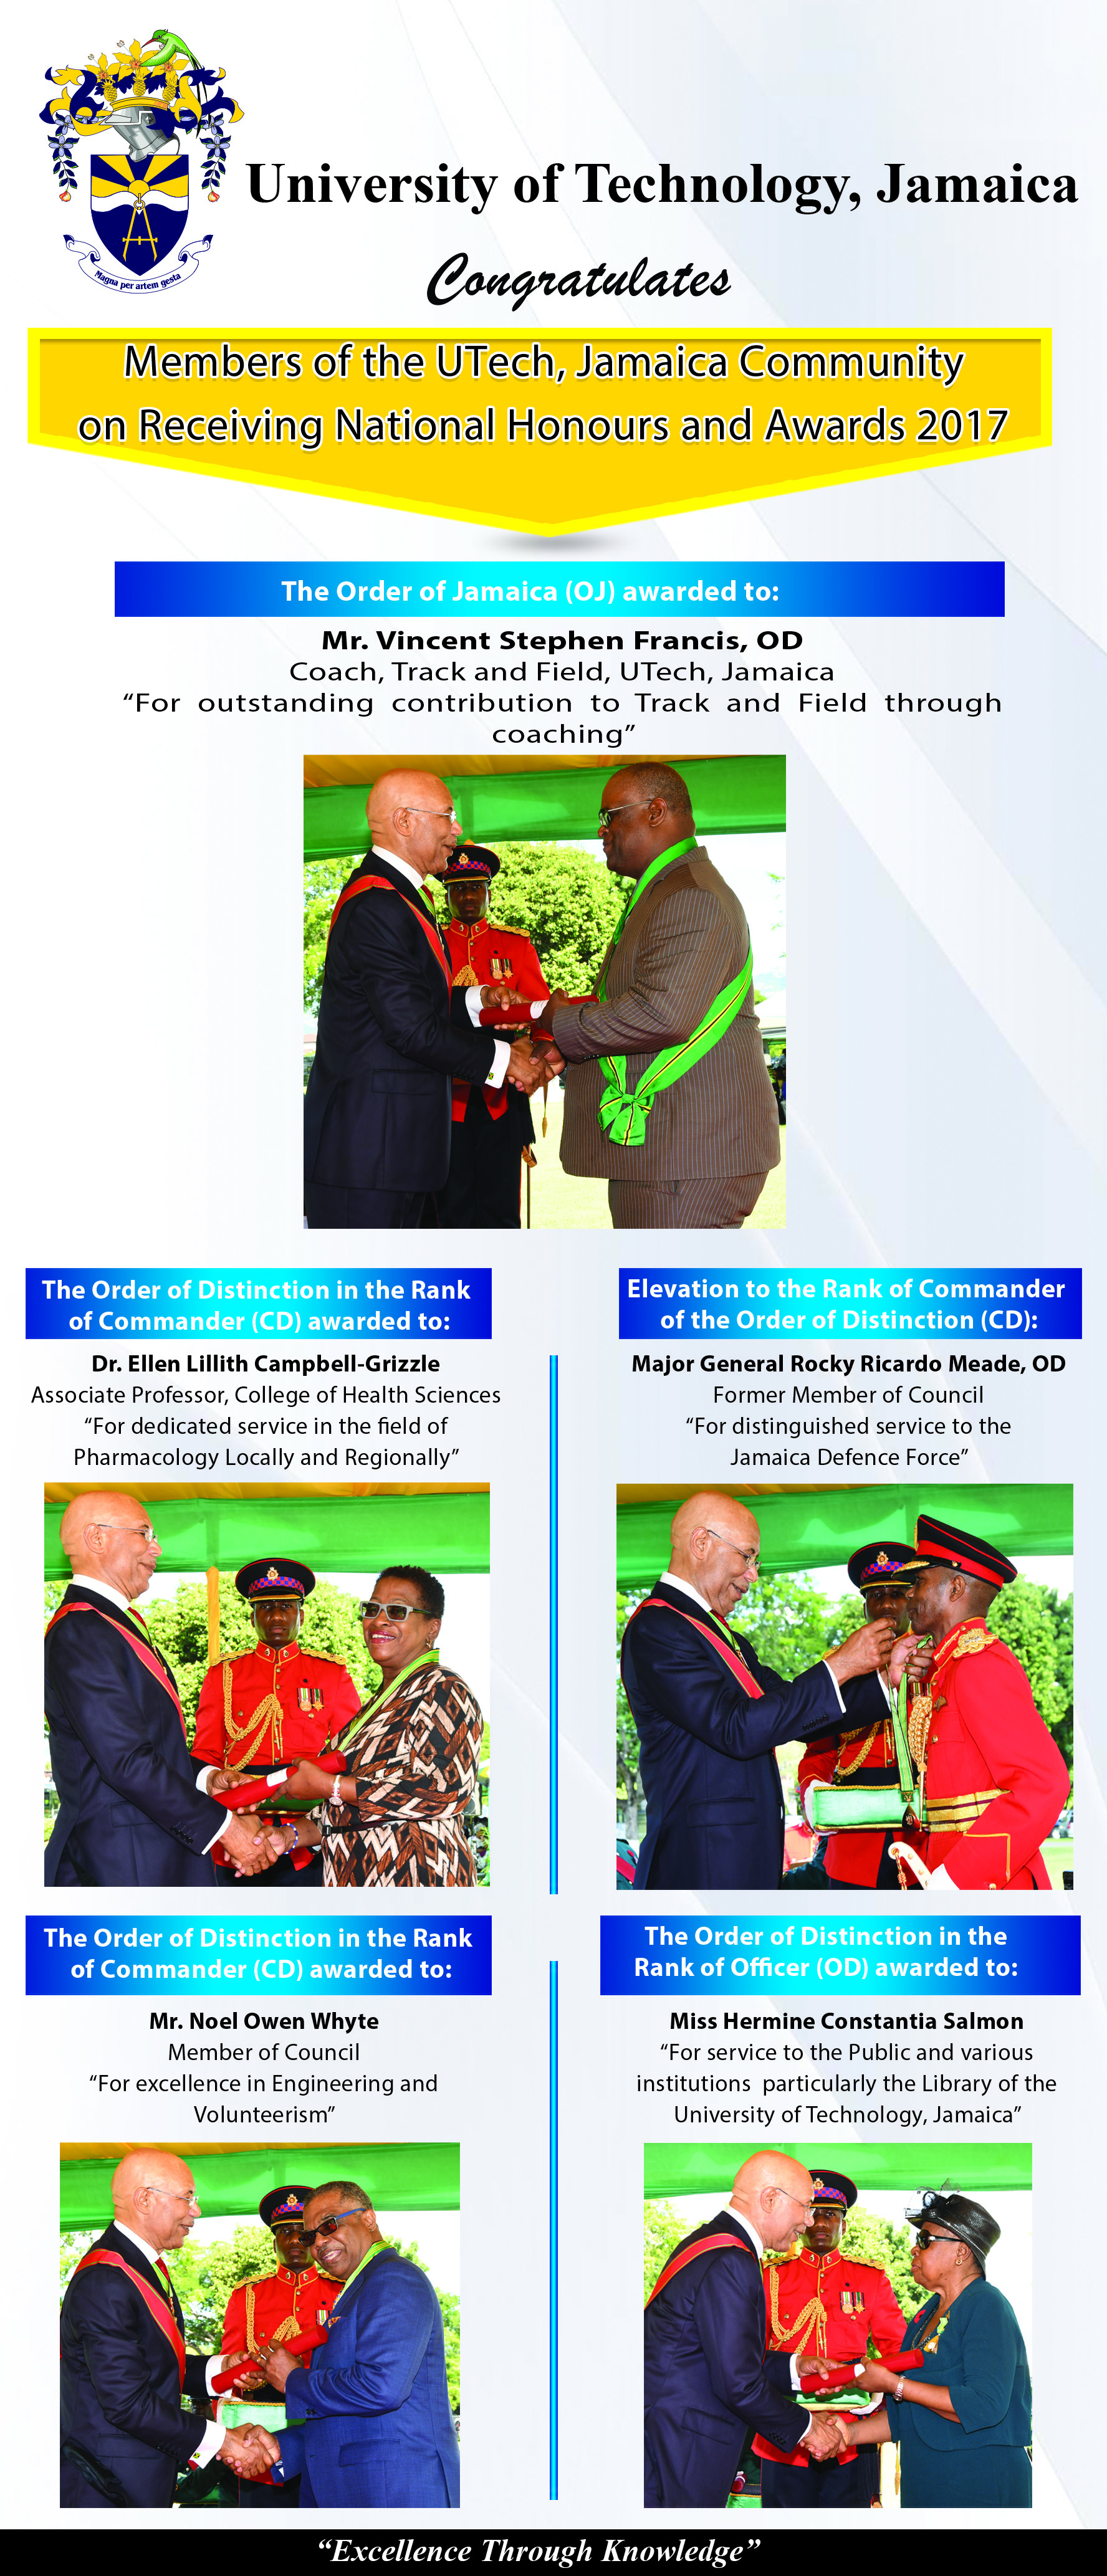 Members of the UTech, Ja. Community Receive National Honours and Awards 